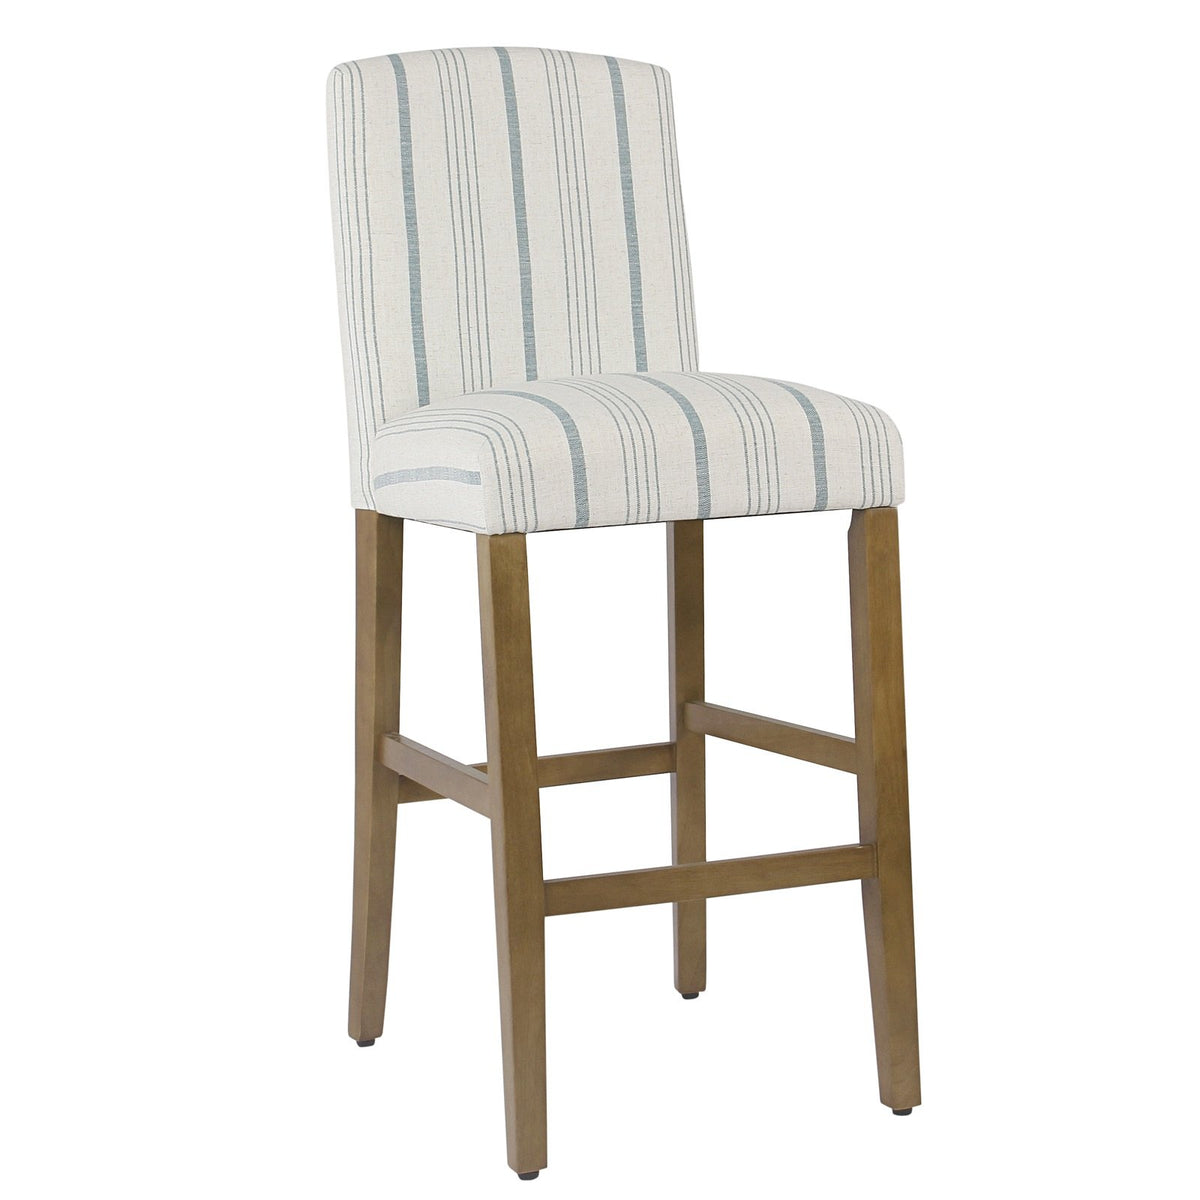 Fabric Upholstered Wooden Barstool with Striped Cushioned Seat, White and Blue - BM195198